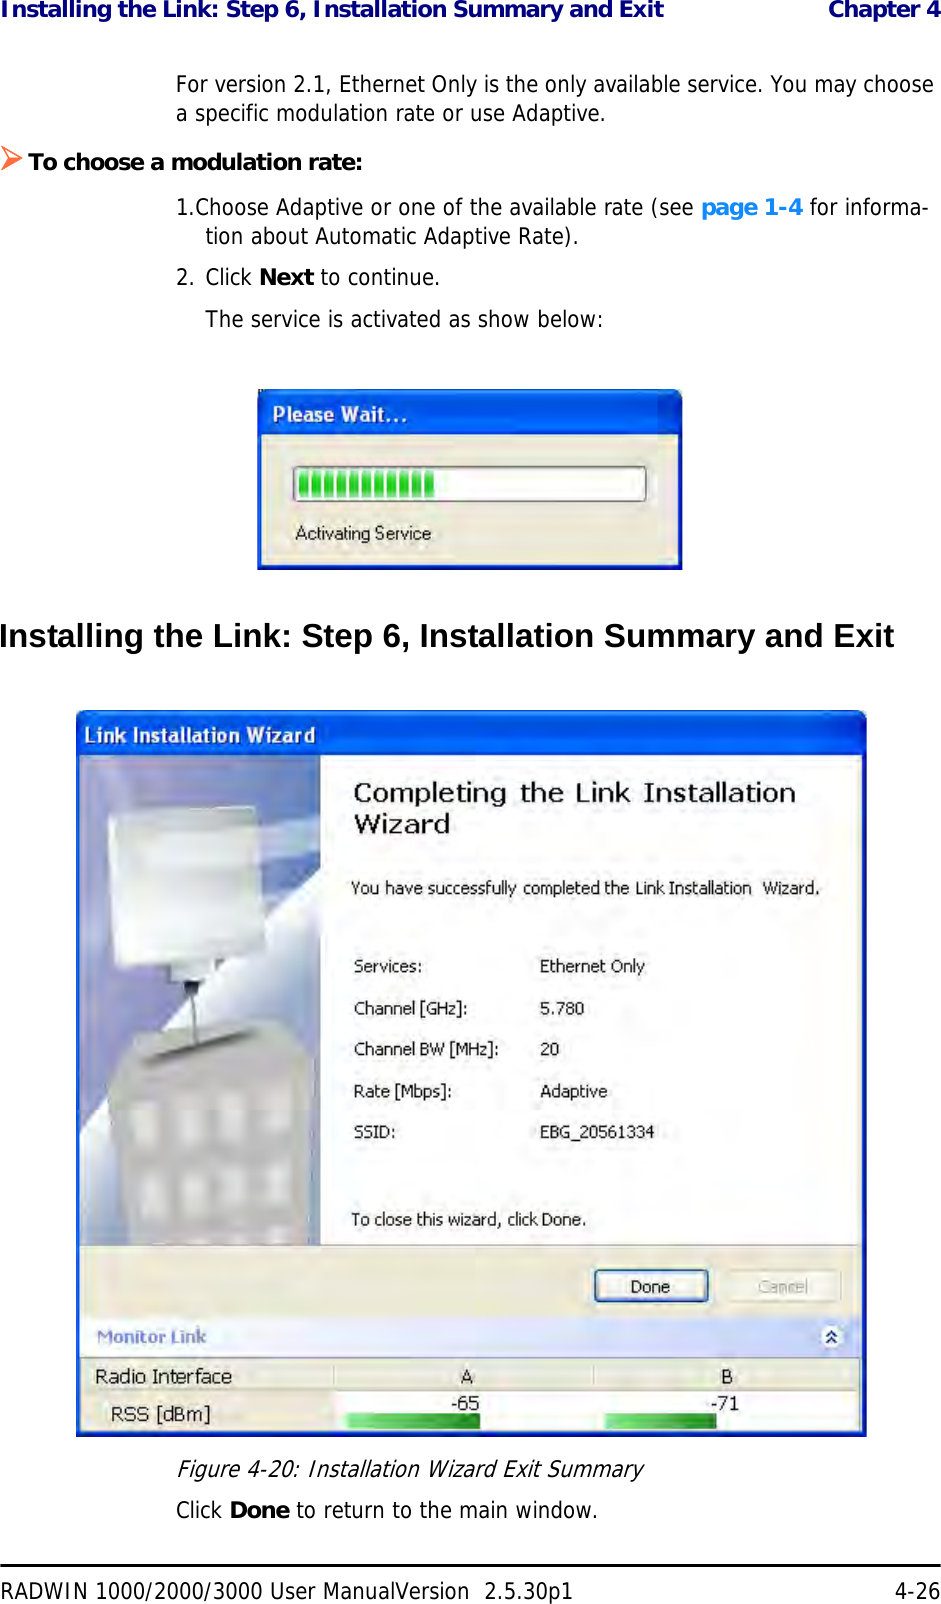 Installing the Link: Step 6, Installation Summary and Exit  Chapter 4RADWIN 1000/2000/3000 User ManualVersion  2.5.30p1 4-26For version 2.1, Ethernet Only is the only available service. You may choose a specific modulation rate or use Adaptive.¾To choose a modulation rate:1.Choose Adaptive or one of the available rate (see page 1-4 for informa-tion about Automatic Adaptive Rate).2. Click Next to continue.The service is activated as show below:Installing the Link: Step 6, Installation Summary and ExitFigure 4-20: Installation Wizard Exit Summary Click Done to return to the main window.